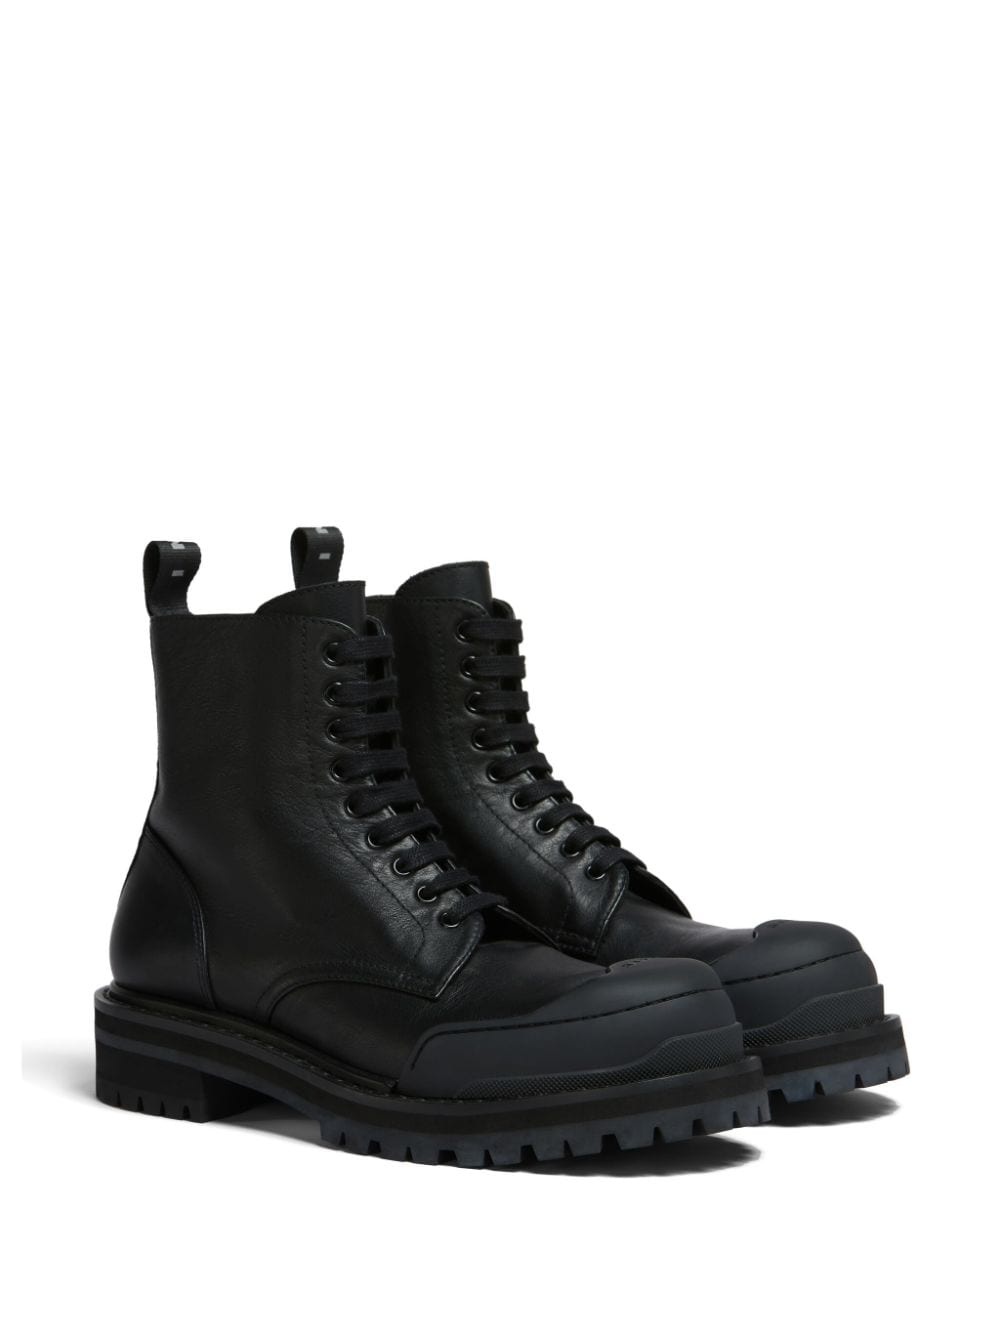 panelled toe combat boots - 2